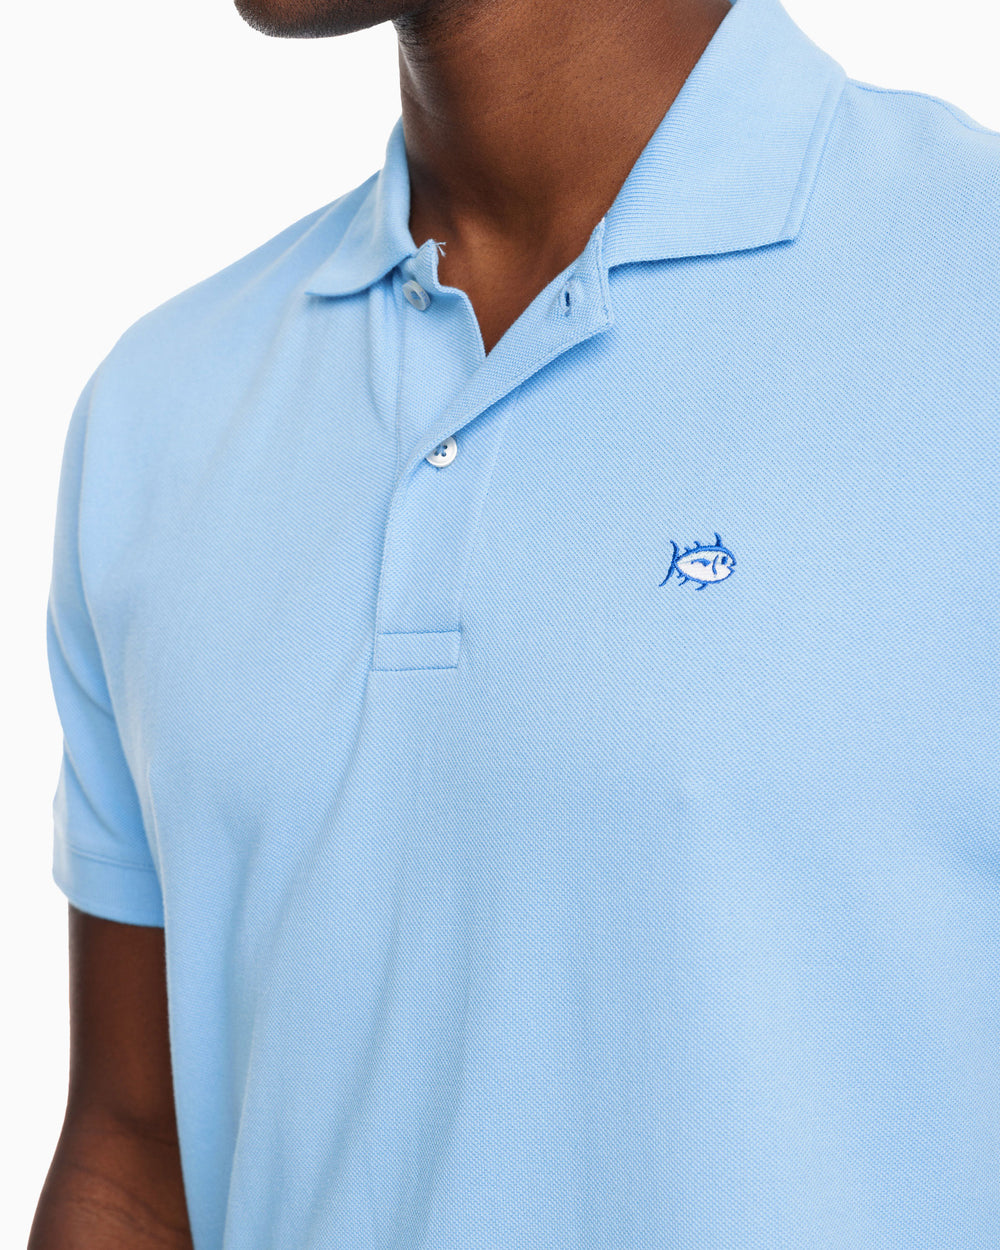 The model detail view of the Men's New Skipjack Polo Shirt by Southern Tide - Ocean Channel